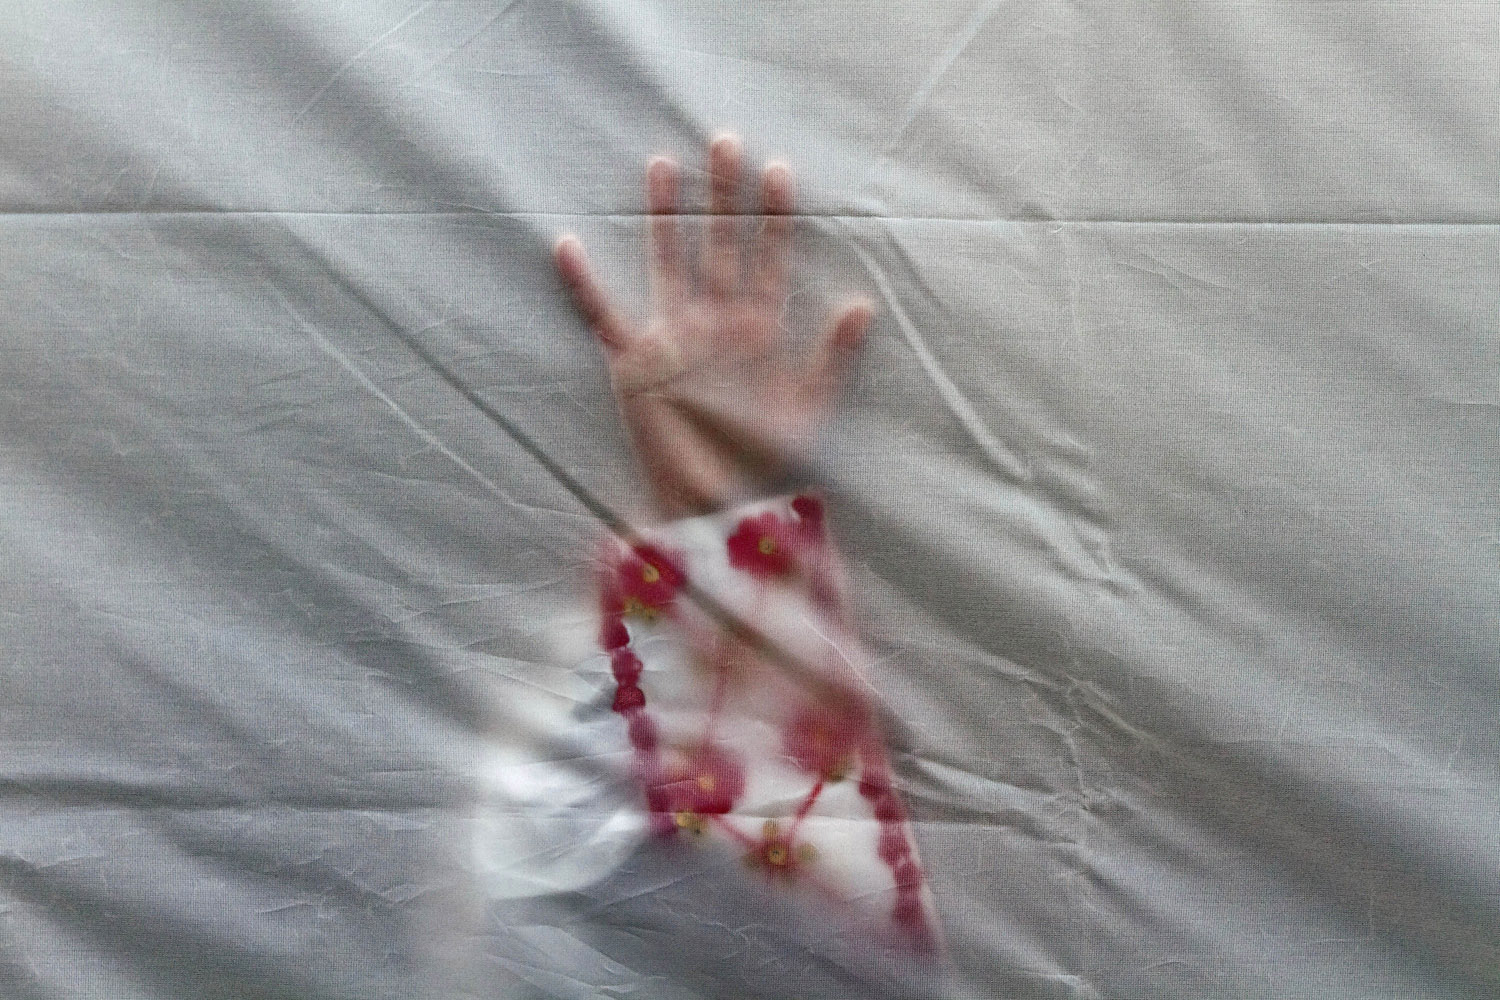 Image: Oct. 27, 2012. A child leans against a tent wall while putting on a costume in Bucharest, Romania during celebrations of the Eid al-Adha organized by the Turkish community.